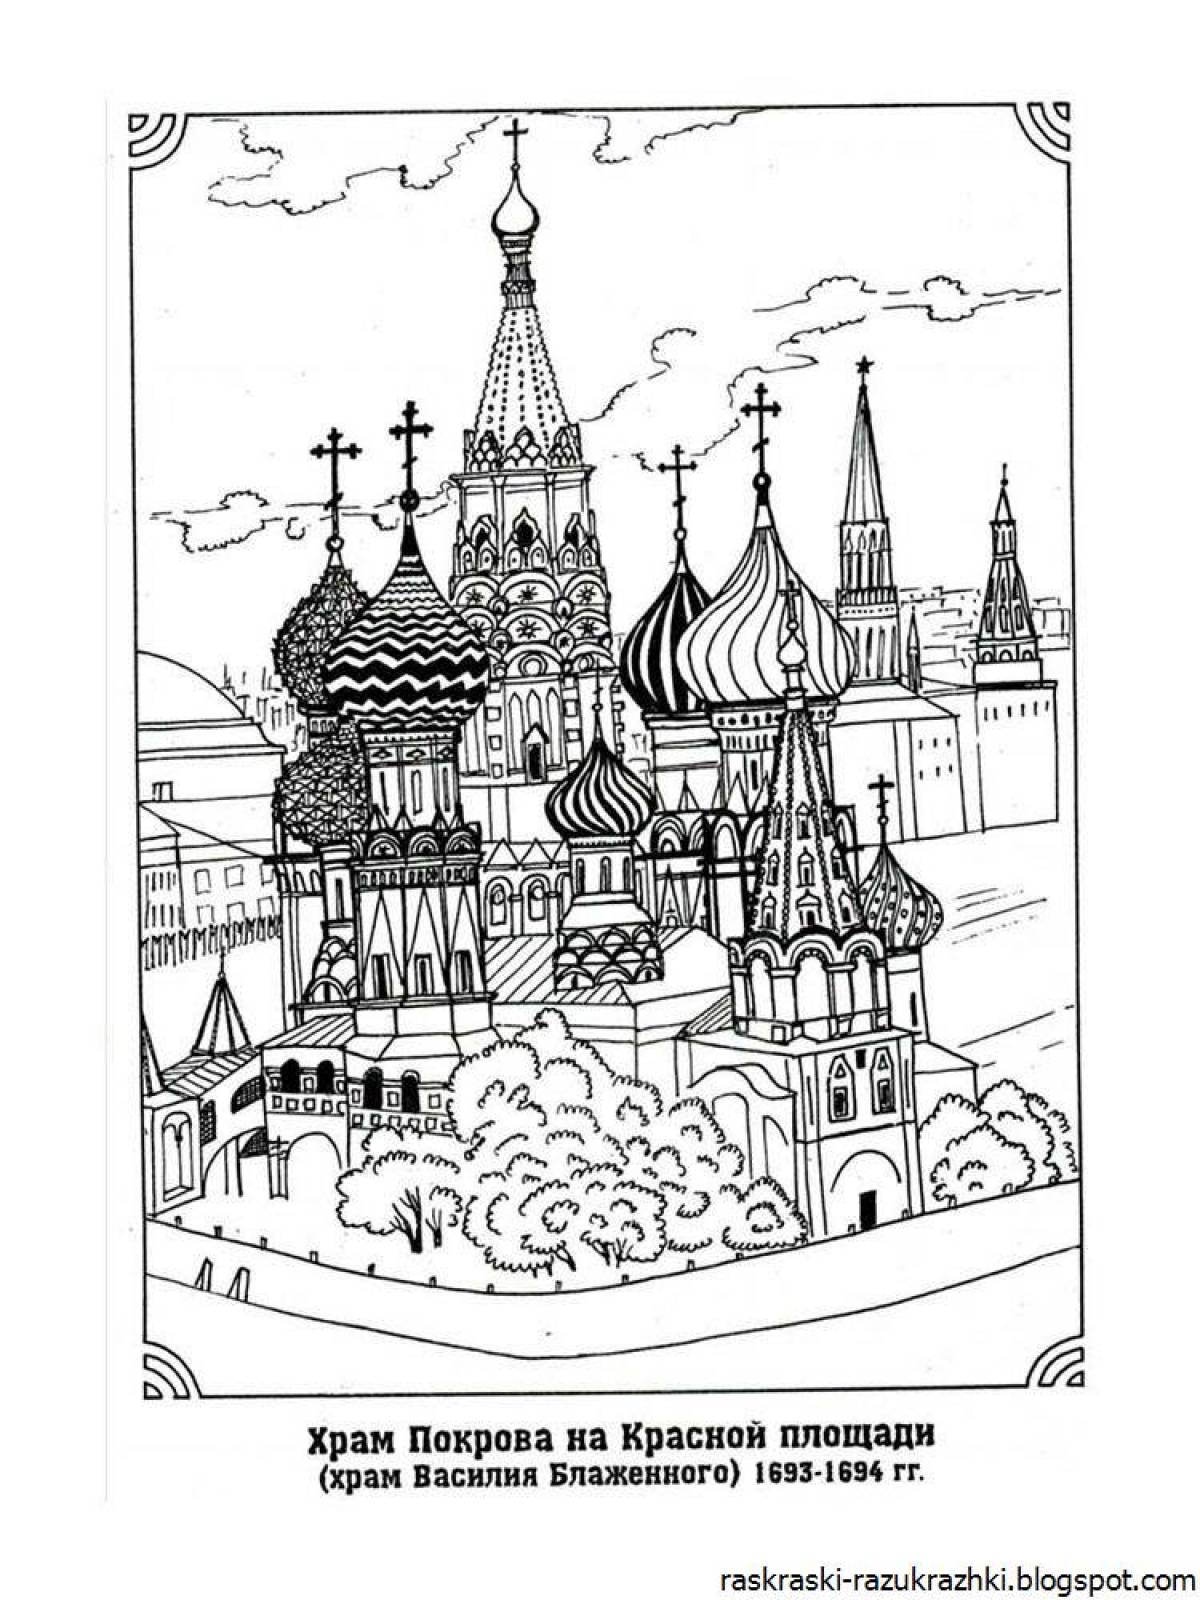 Brilliantly filled red square coloring book